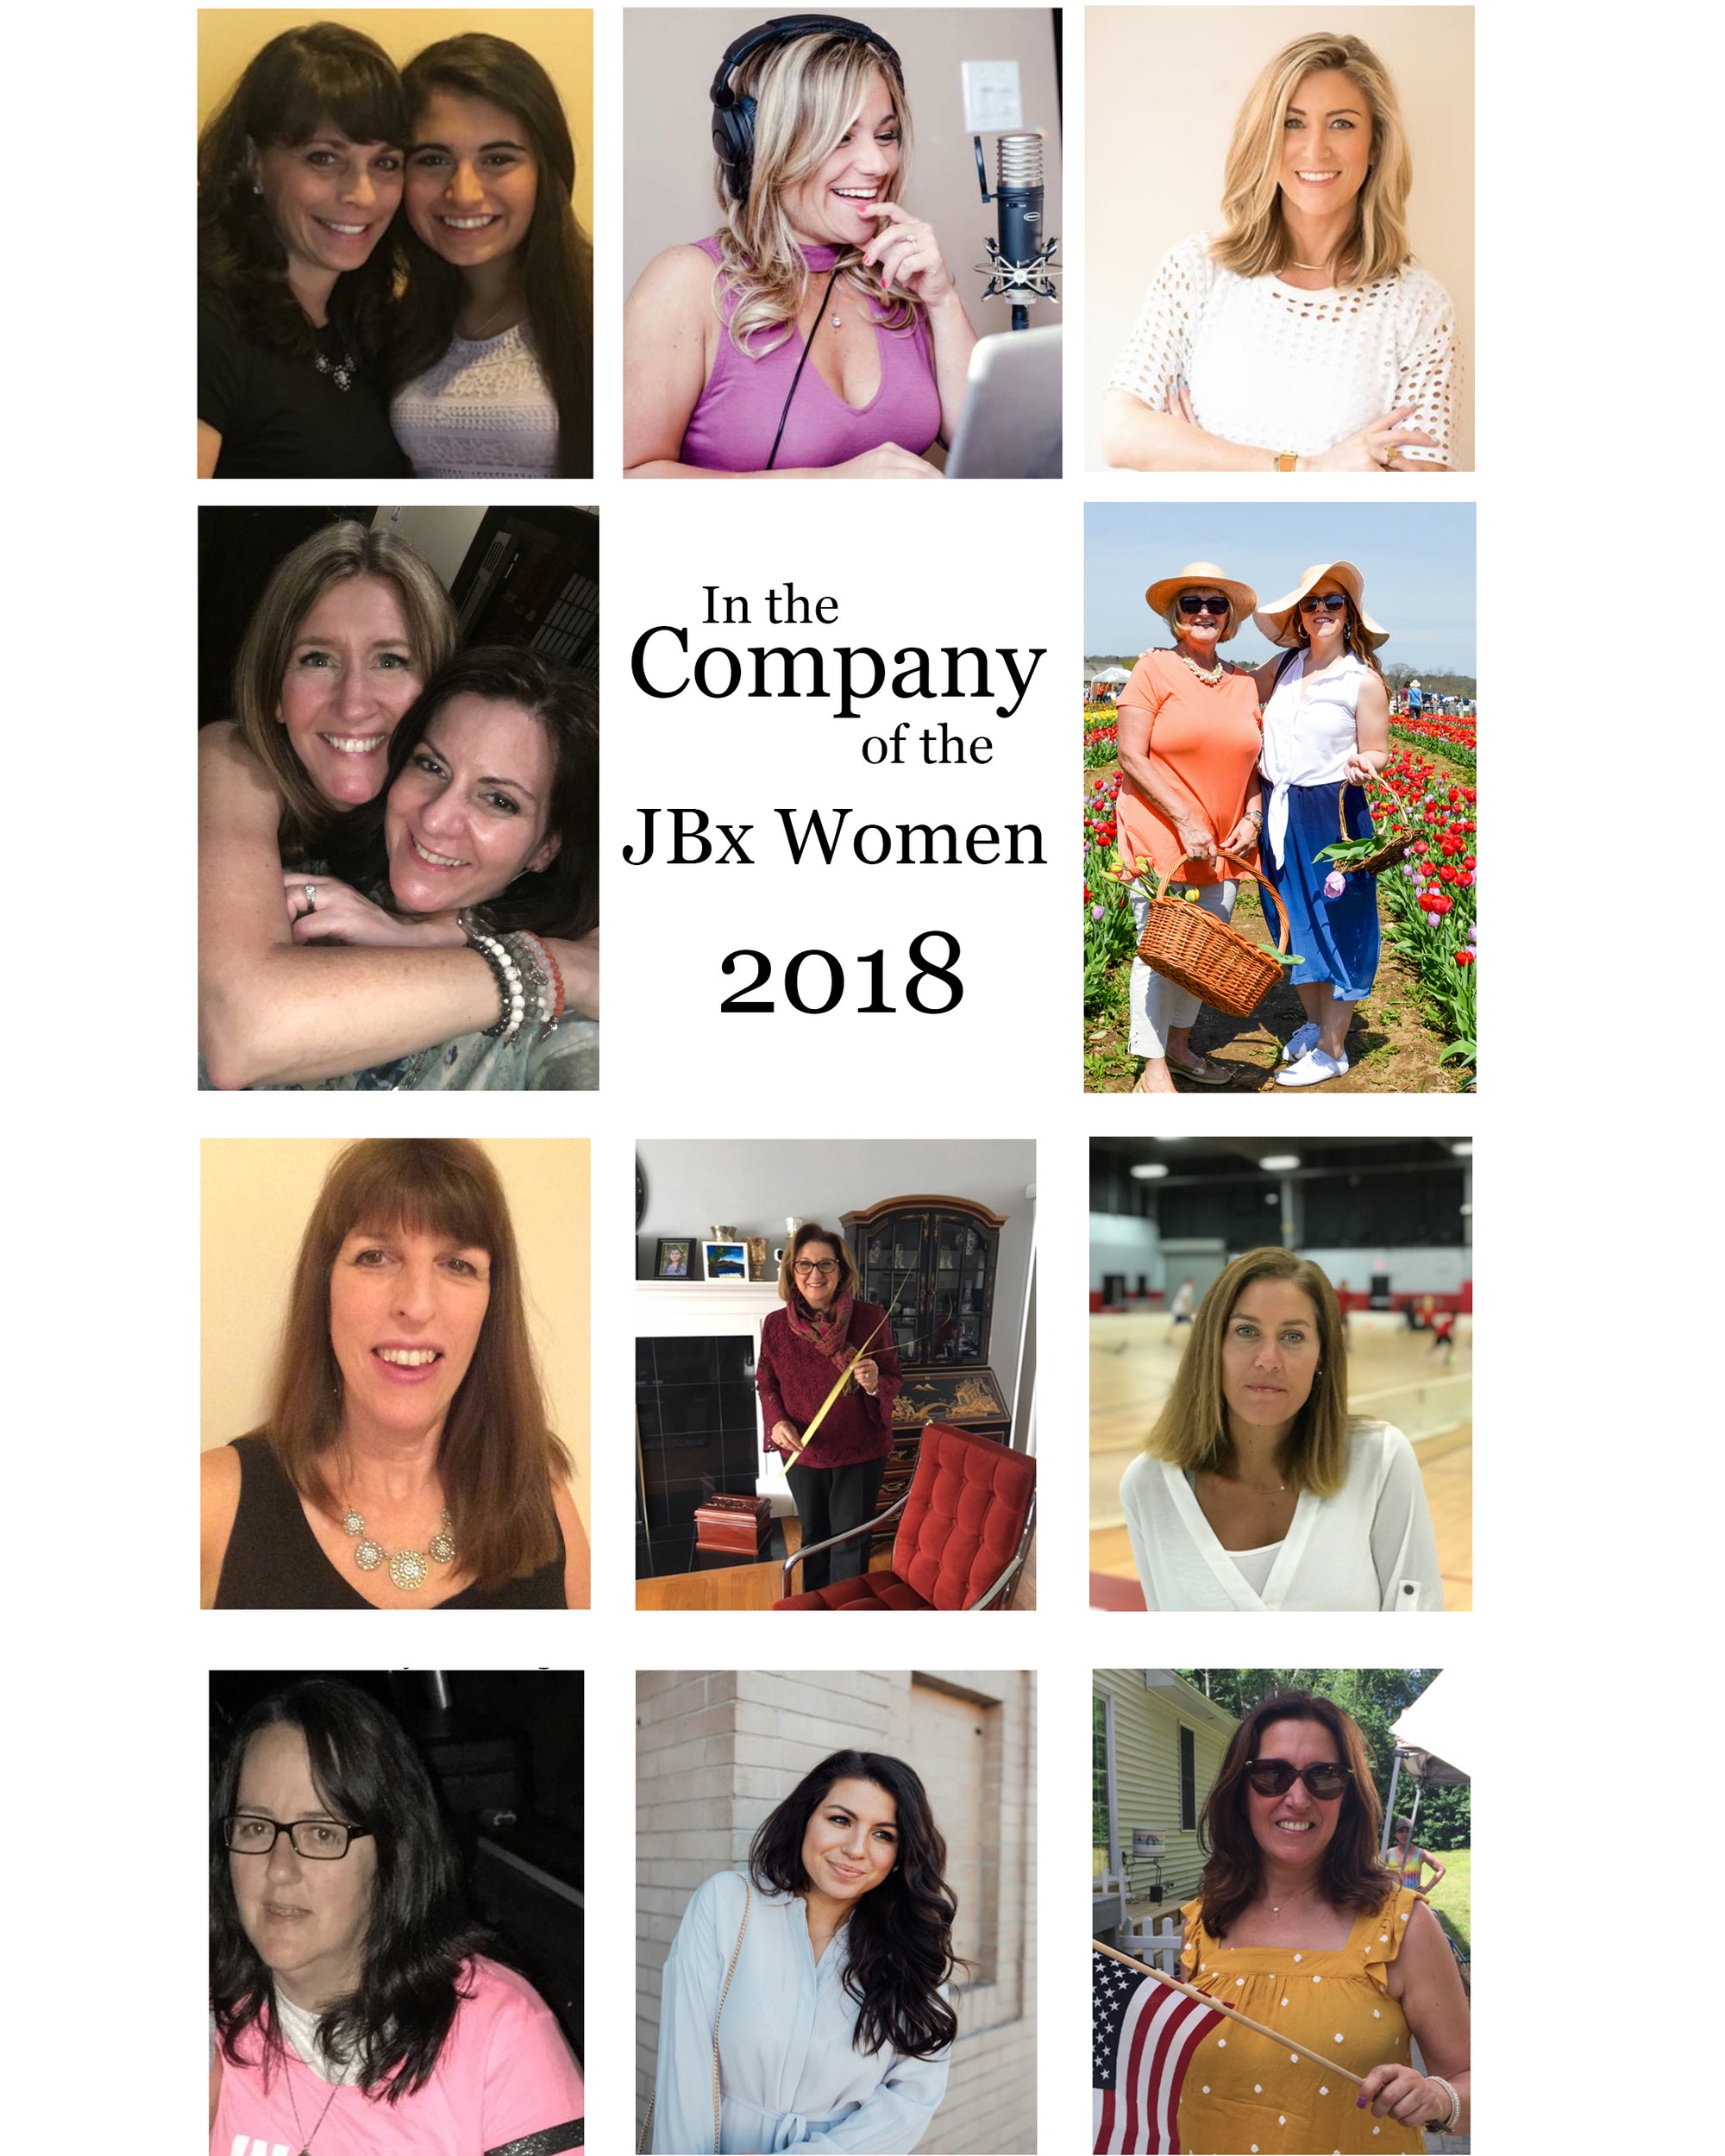 In the Company of the JBx Women - A look back at 2018